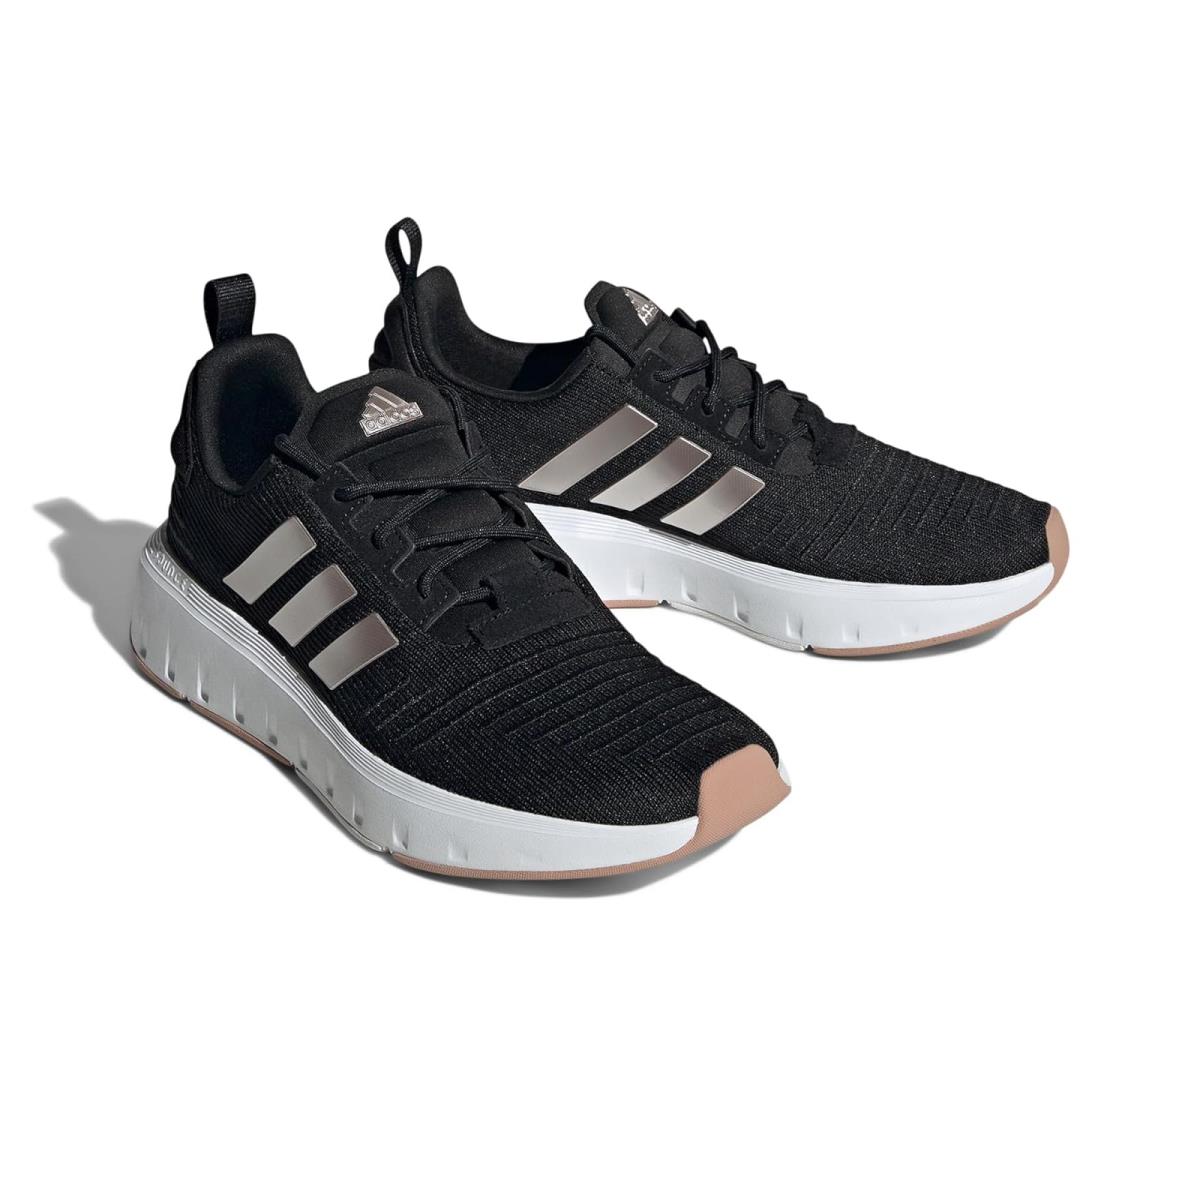 Woman`s Sneakers Athletic Shoes Adidas Running Swift Run23 Core Black/Champagne Metallic/Footwear White